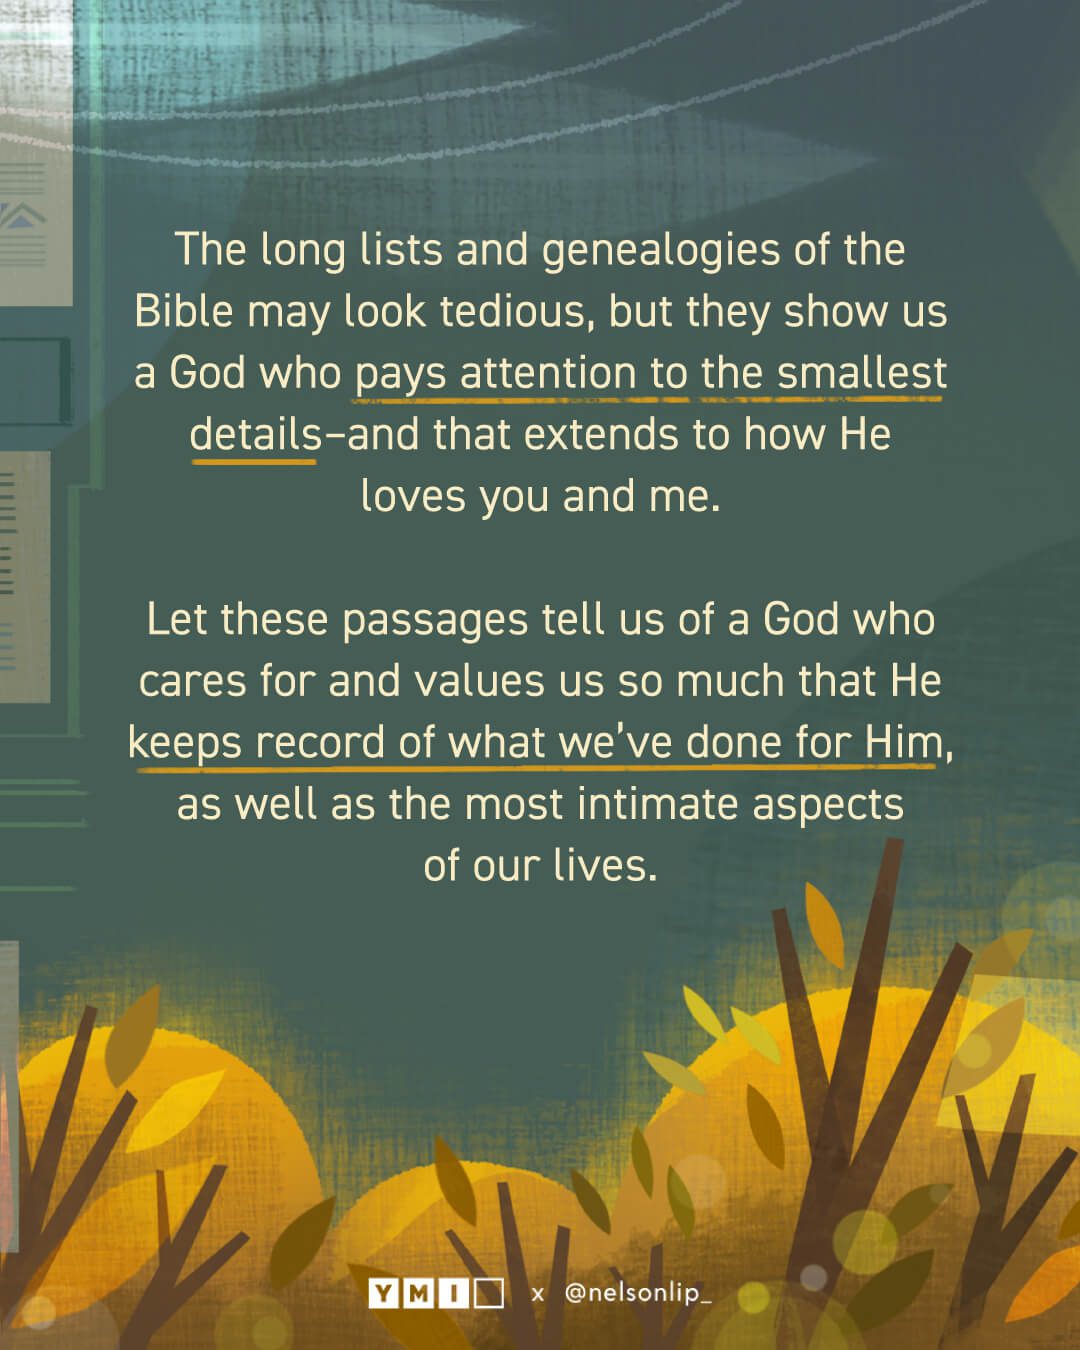 Background with the text of "The long lists and genealogies of the Bible may look tedios, but they show us a God who pays attention to the smallest details–and that extends to how He loves you and me. Let these passages tell us of a God who cares for and values us so much that He keeps record of what we’ve done for Him, as well as the most intimate aspects of our lives."